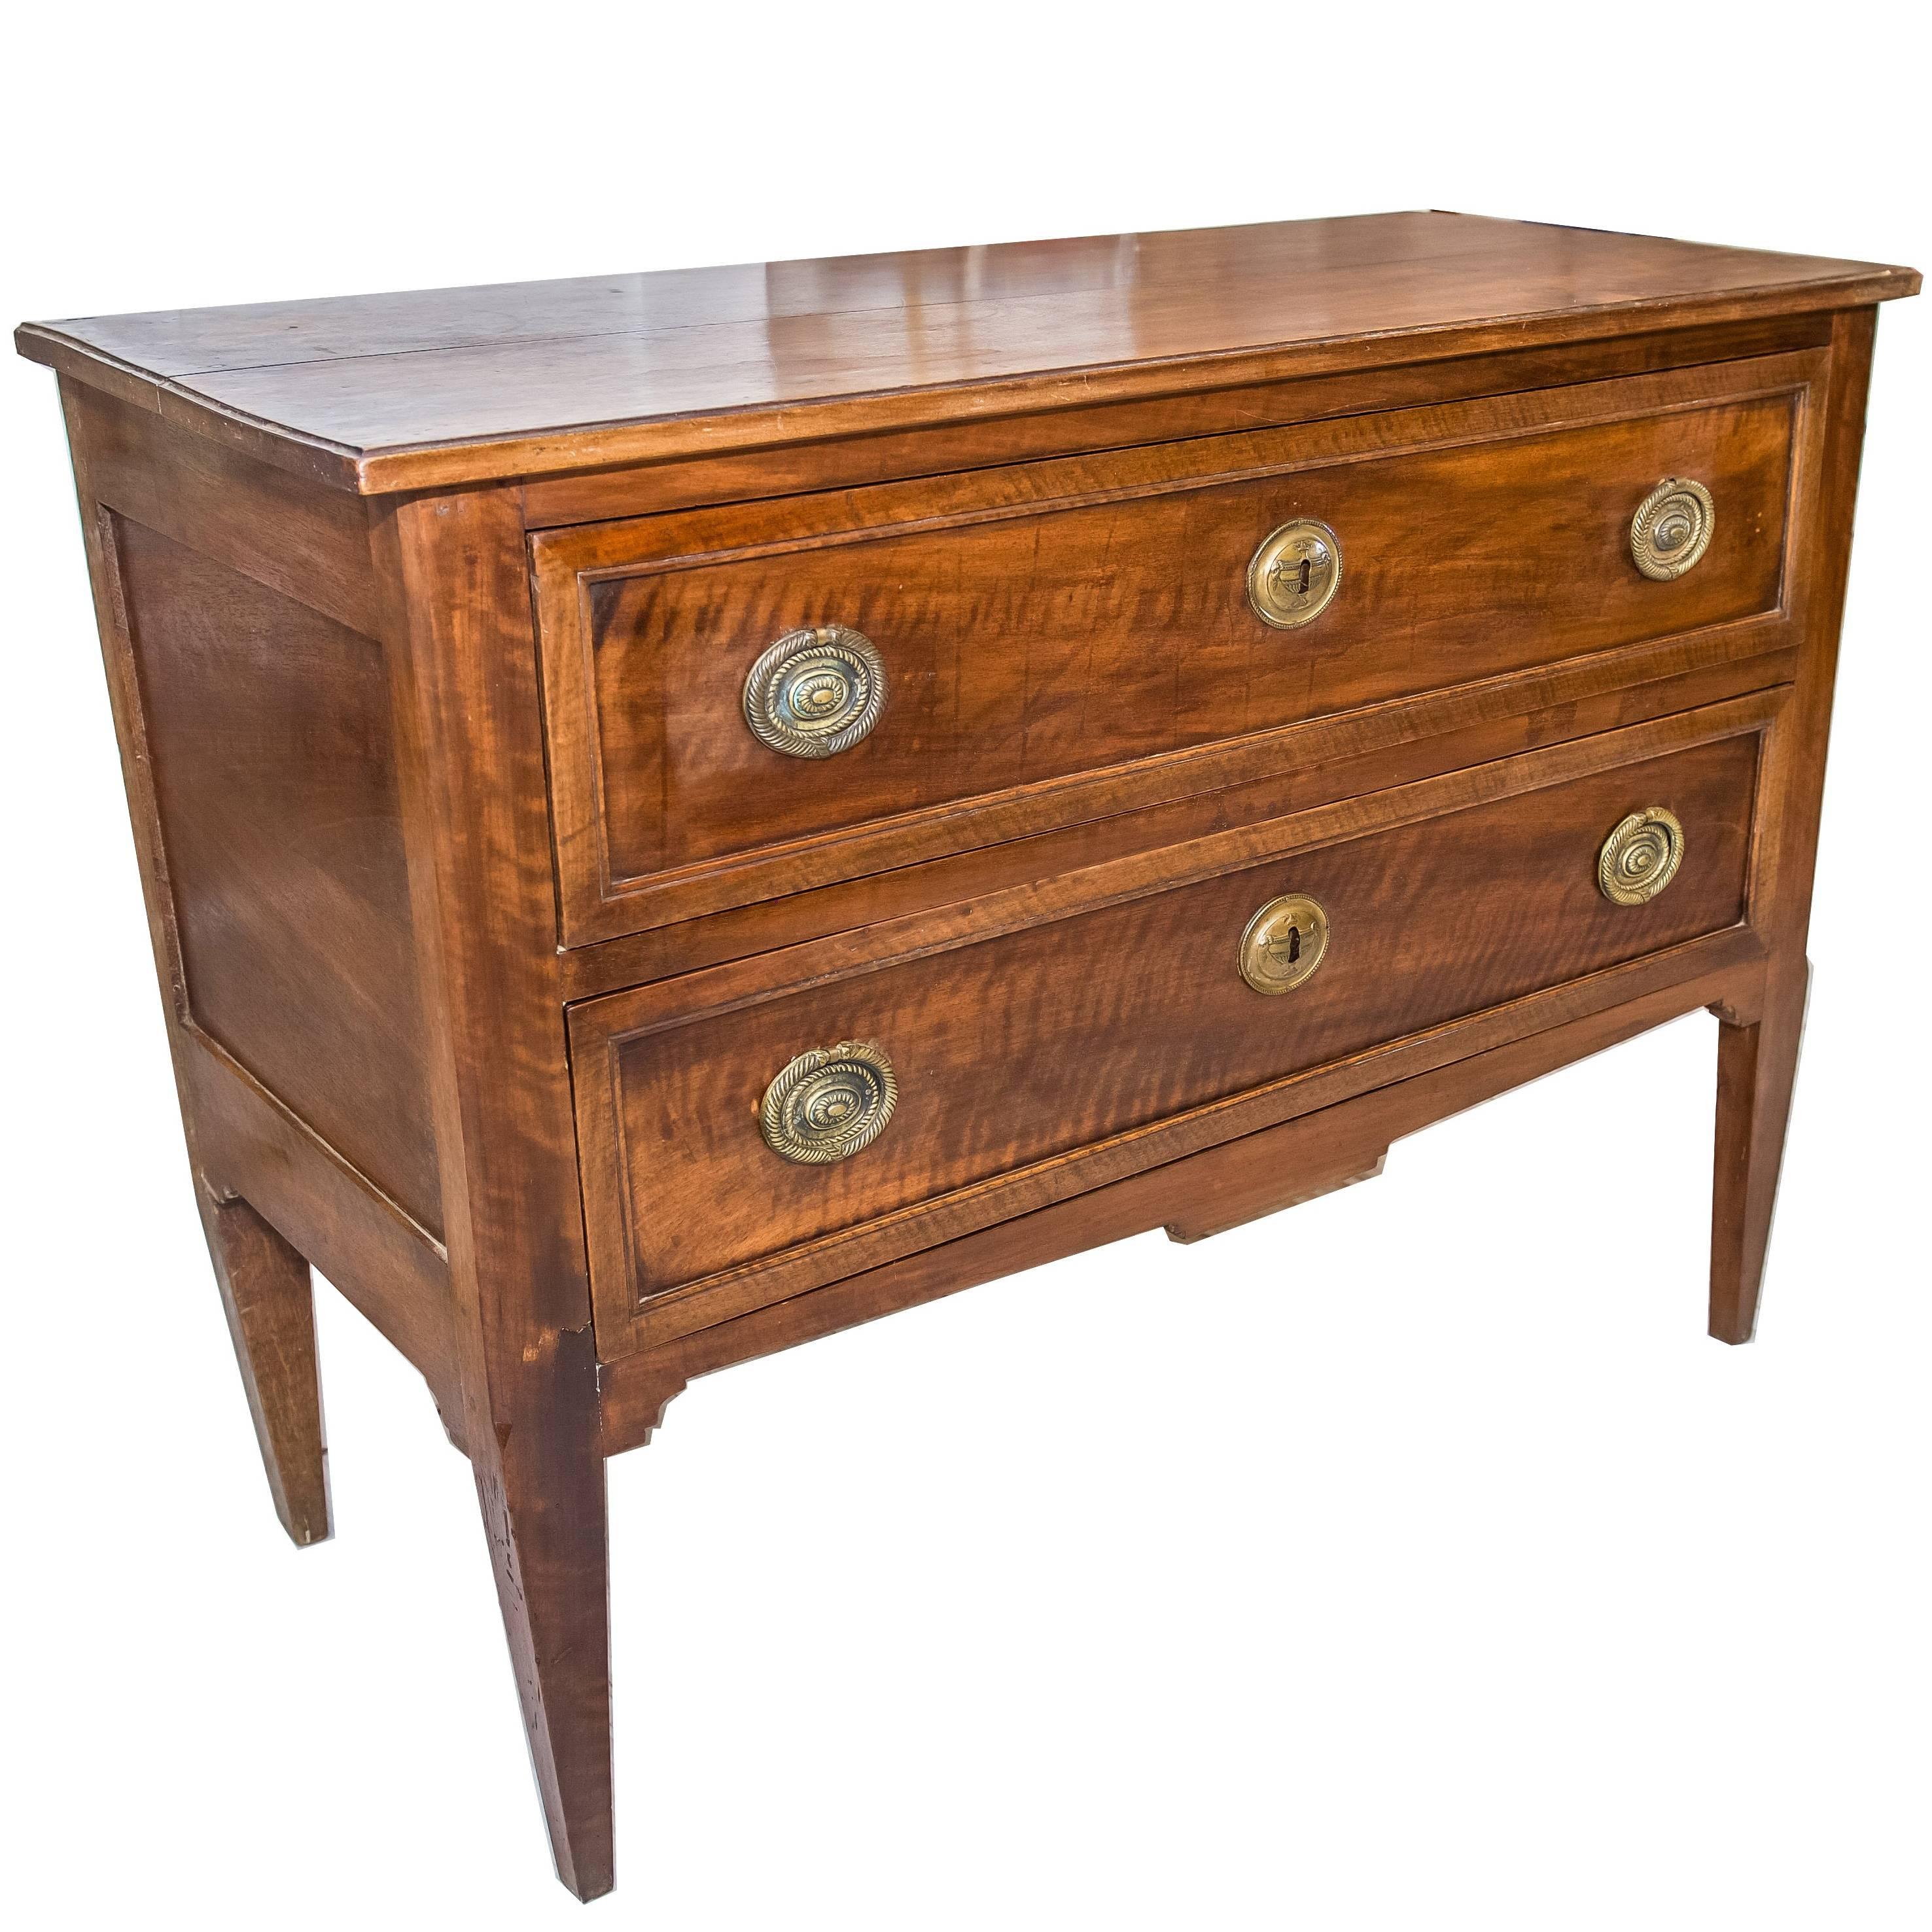 French Louis XVI Style Walnut Commode Sauteuse with Two Drawers and Tapered Legs